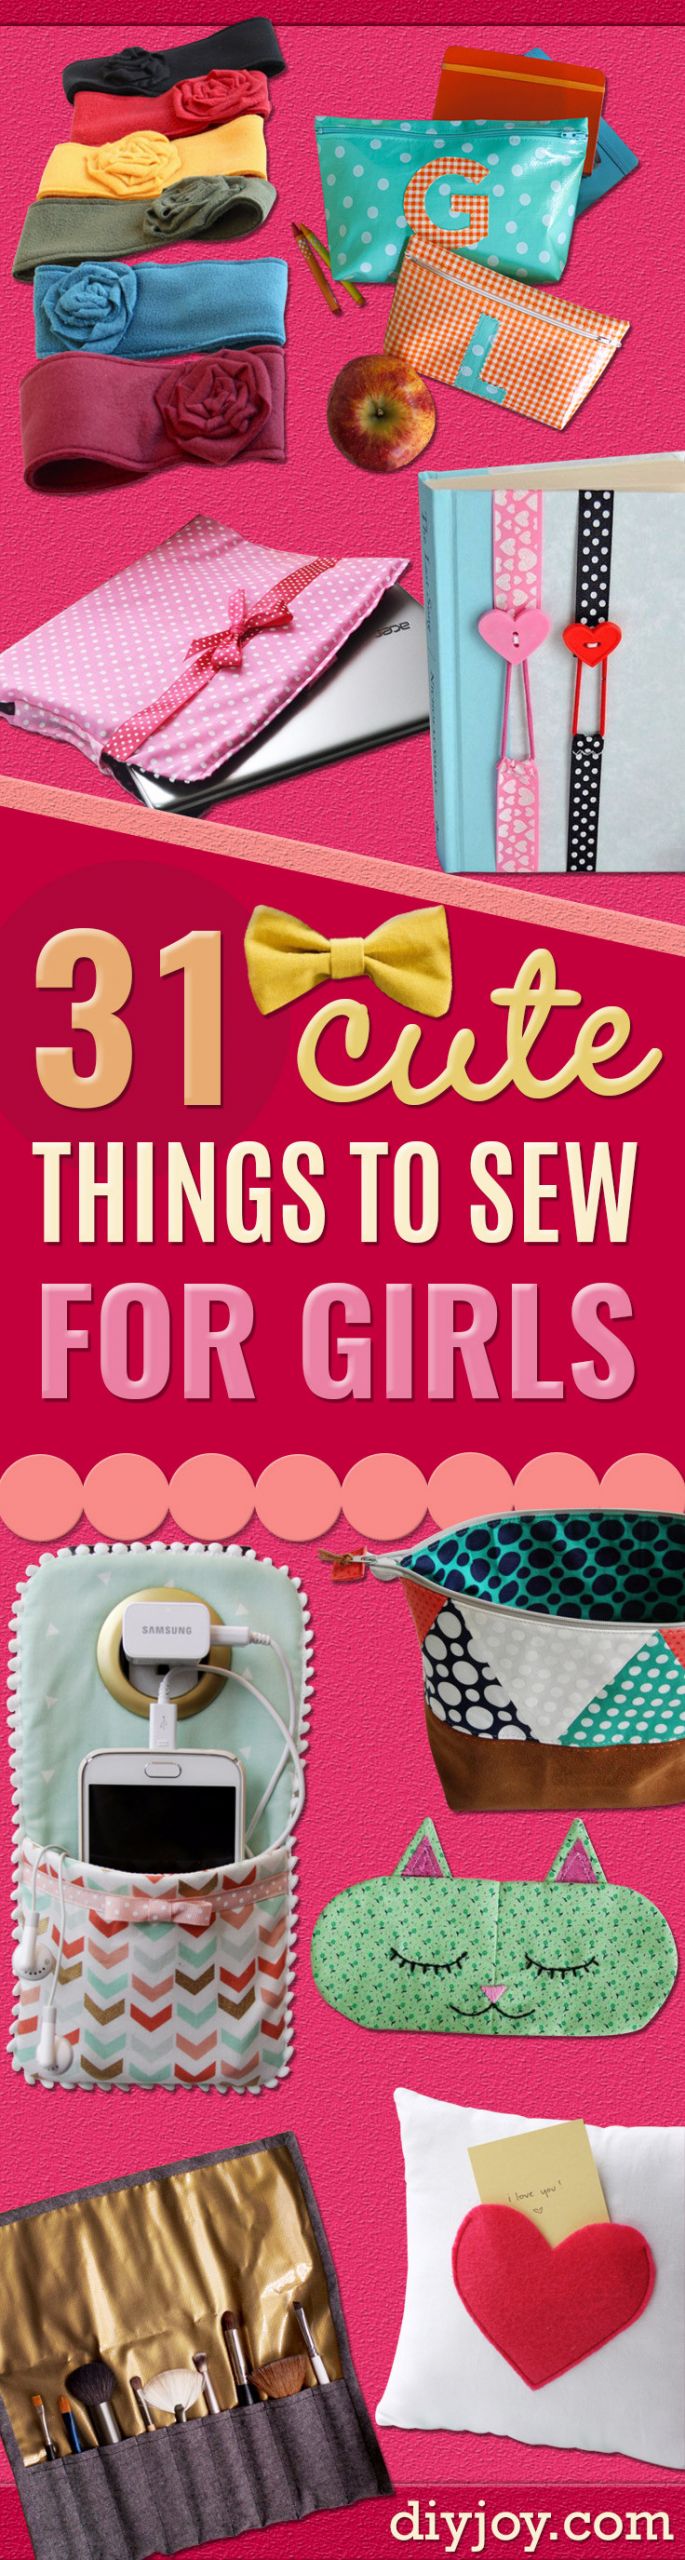 Cute Stuff For Kids
 31 Things to Sew for Girls